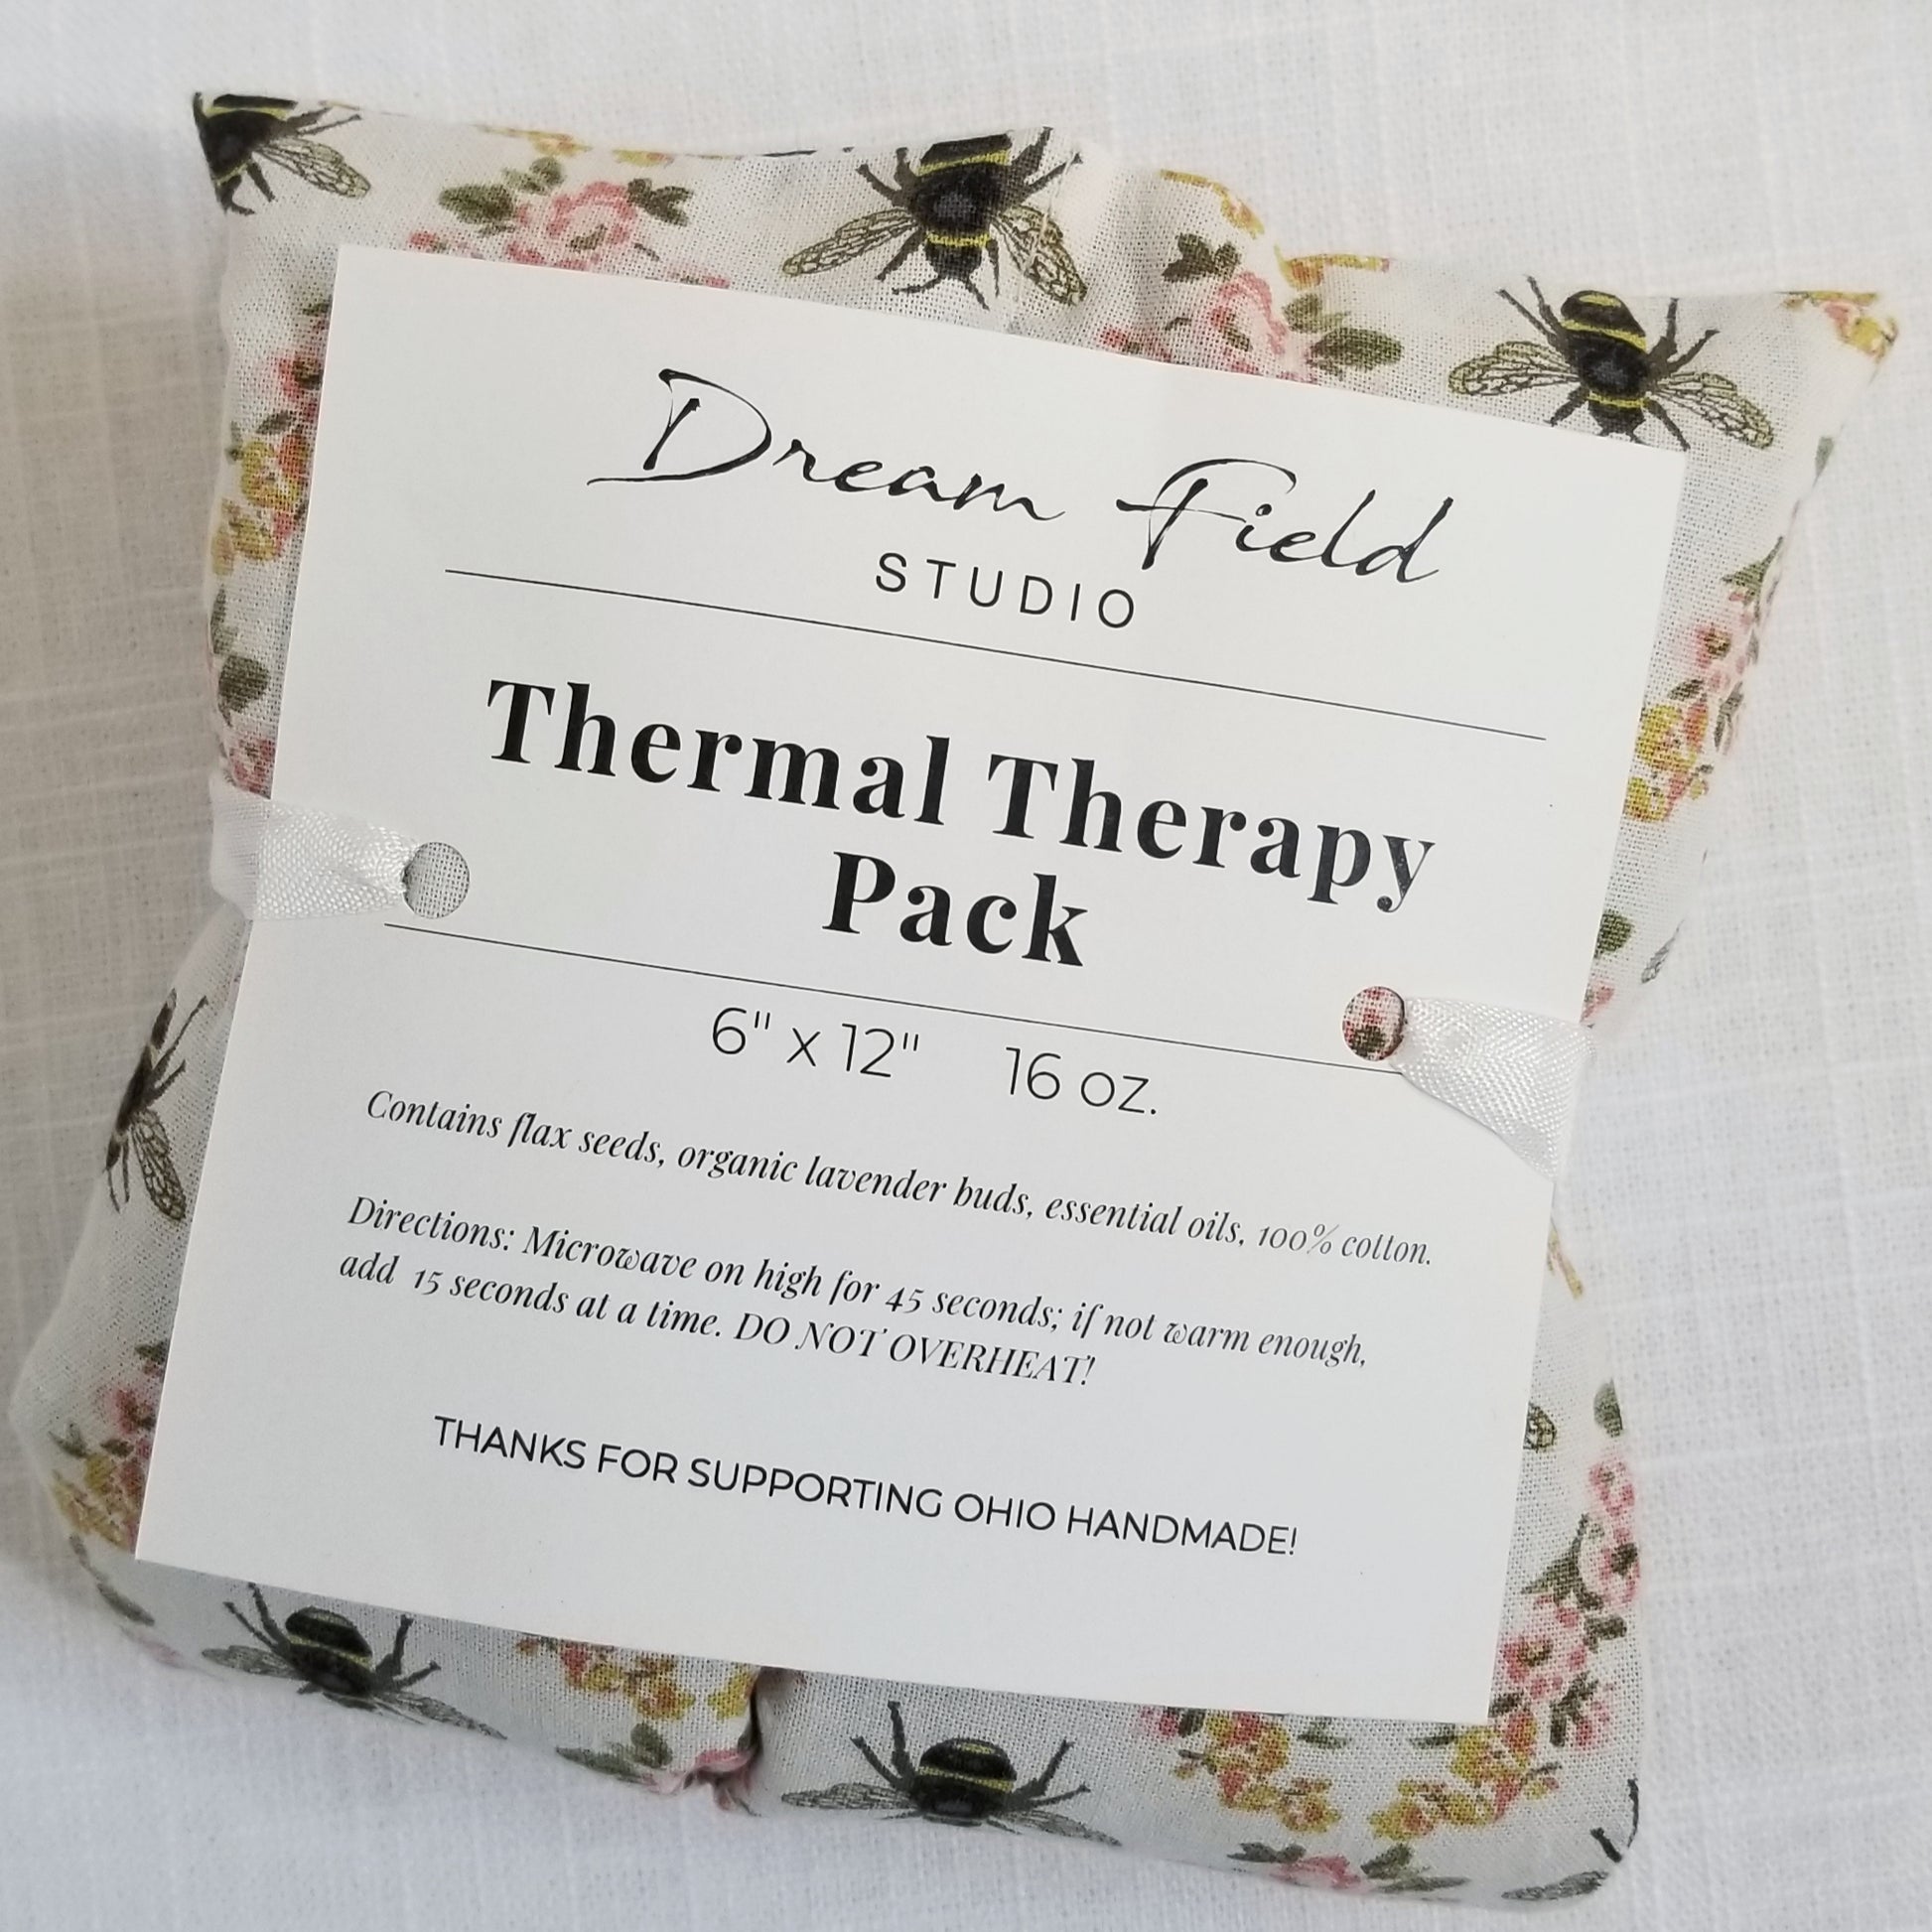 Thermal therapy pack flax seeds, lavender buds, essential oils 100% cotton 